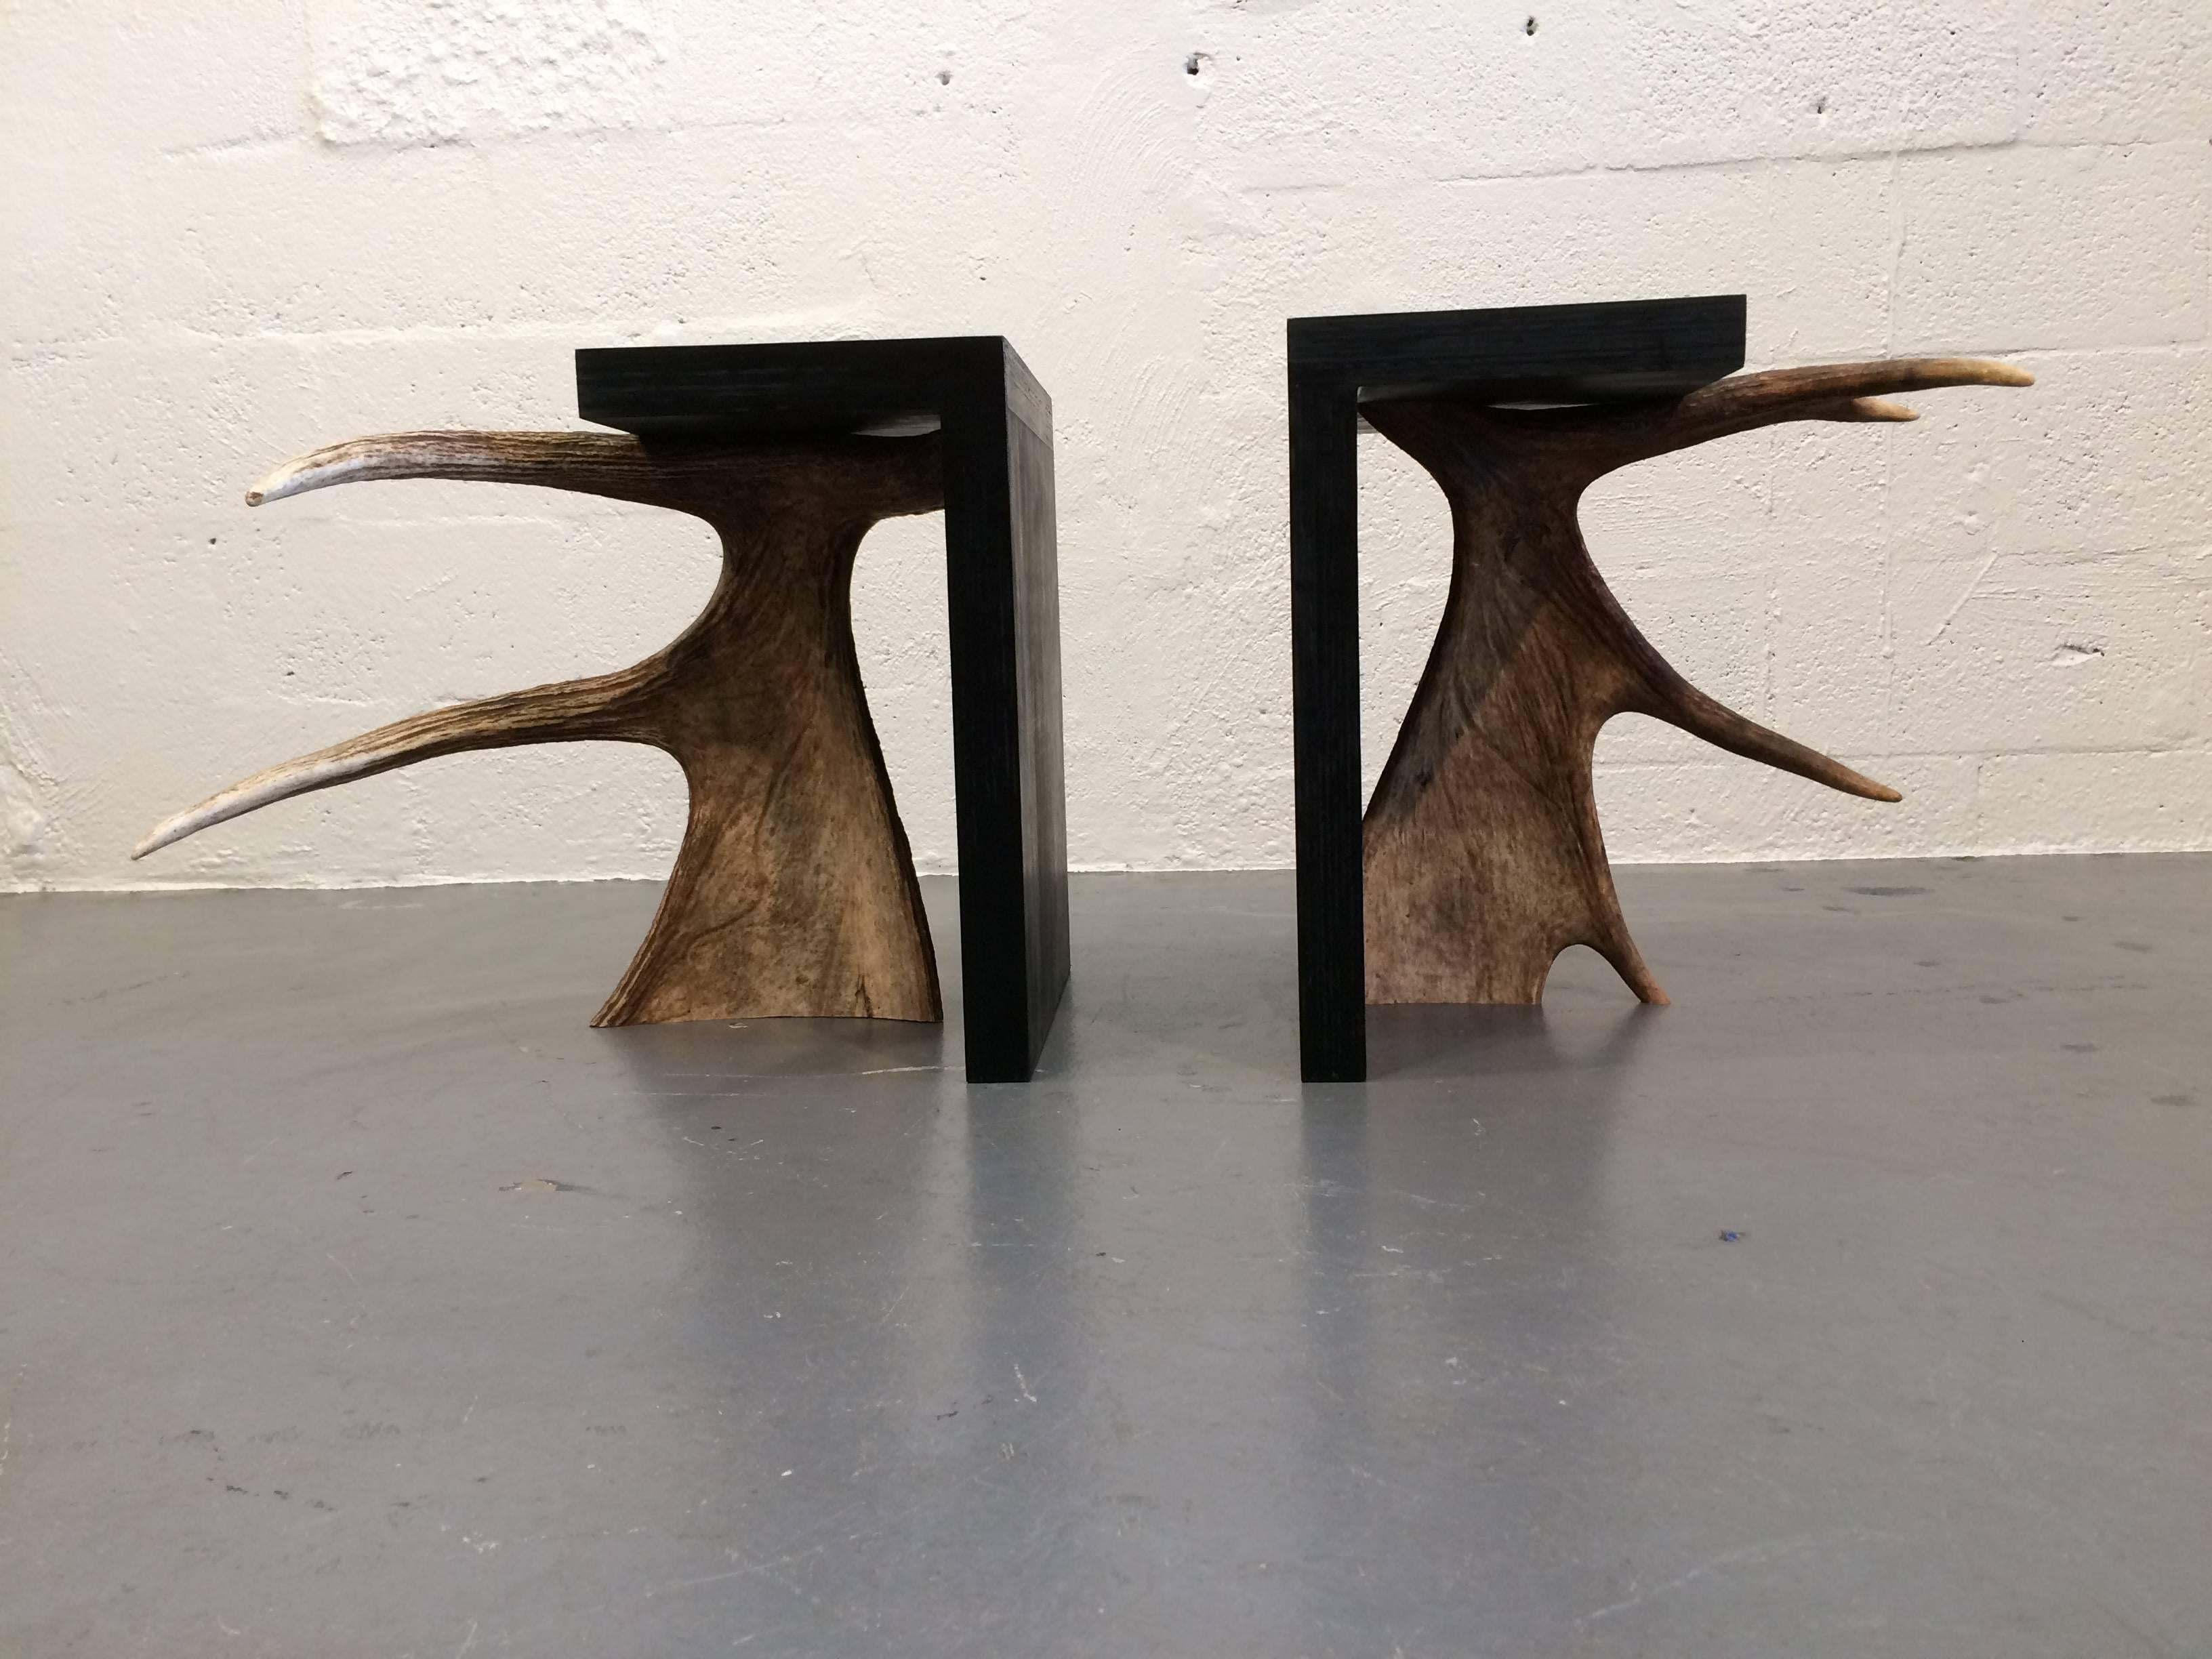 Signed Rick Owens stools or tables in used condition. Black painted plywood with raw Moose antler. Measures: Smaller stool is 15.75